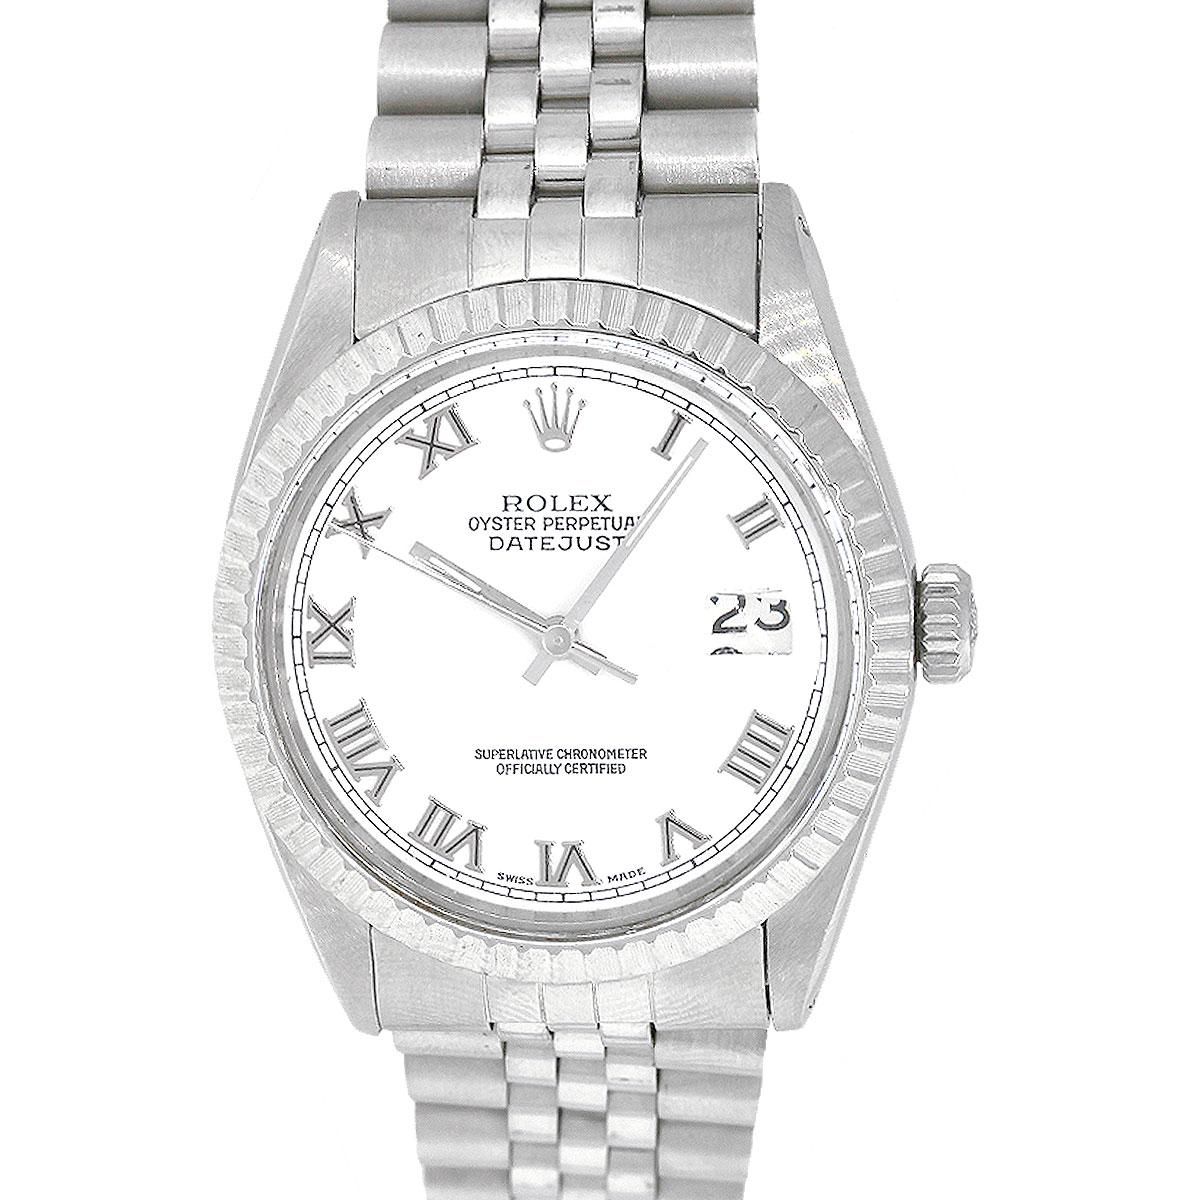 Brand: Rolex
MPN: 16014
Model: Datejust
Case Material: Stainless steel
Case Diameter: 36mm
Crystal: Plastic
Bezel: Stainless Steel fluted bezel
Dial: White silver roman dial with date window at the 3 o’clock position
Bracelet: Stainless steel